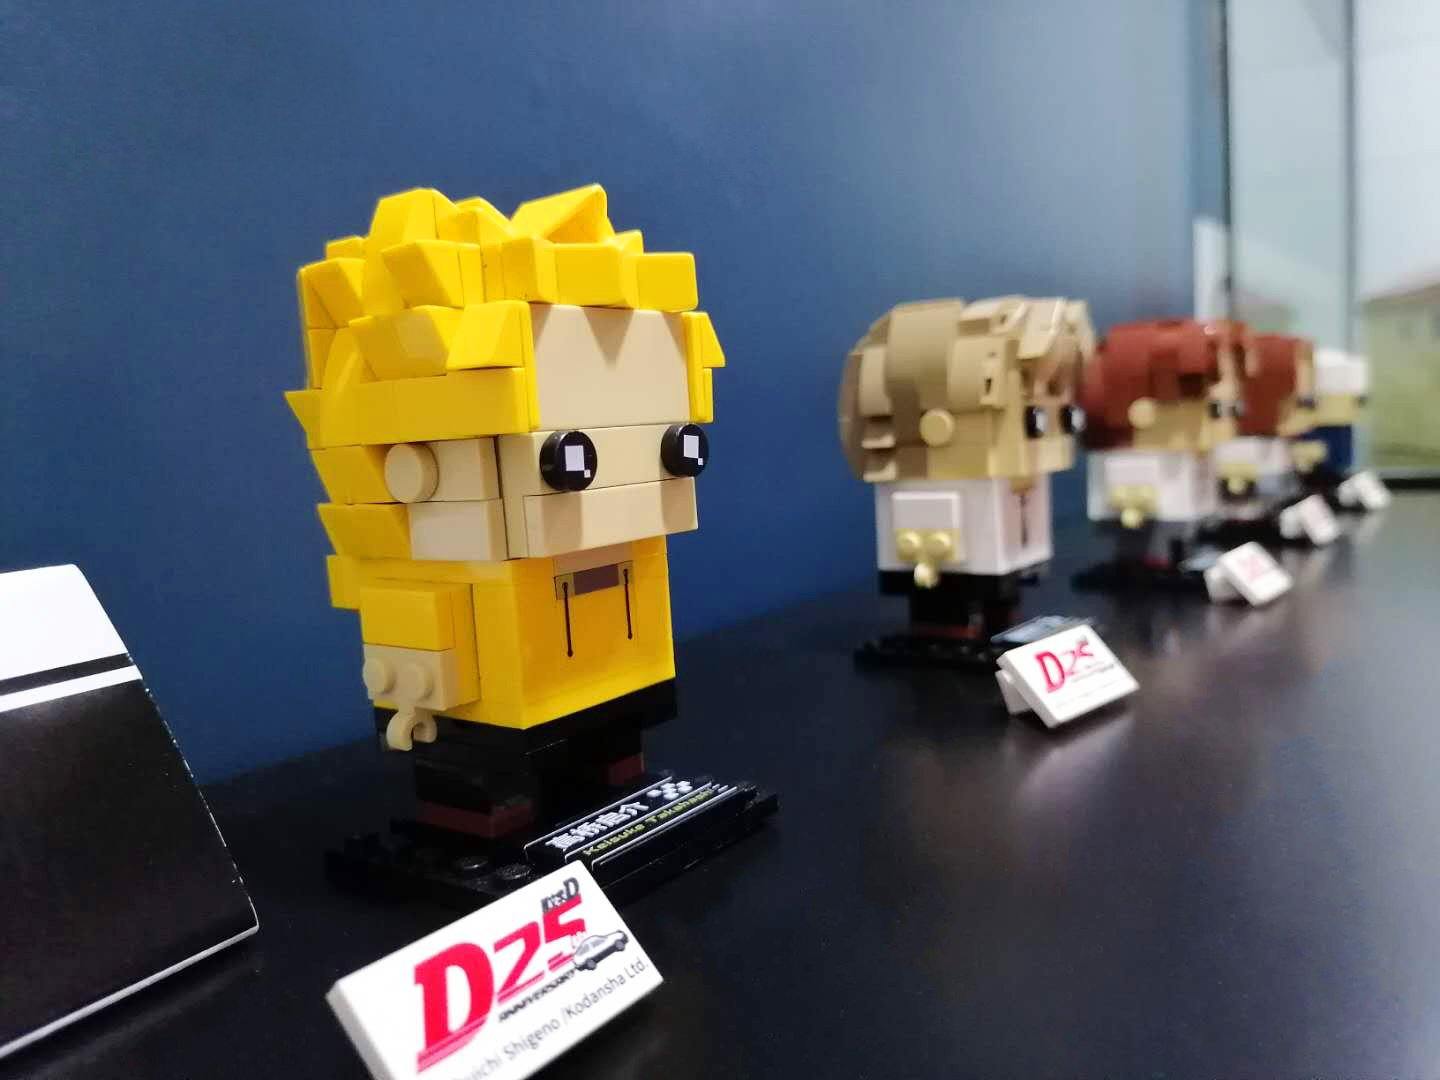 The Initial D cast: Now Available as BrickHead Models